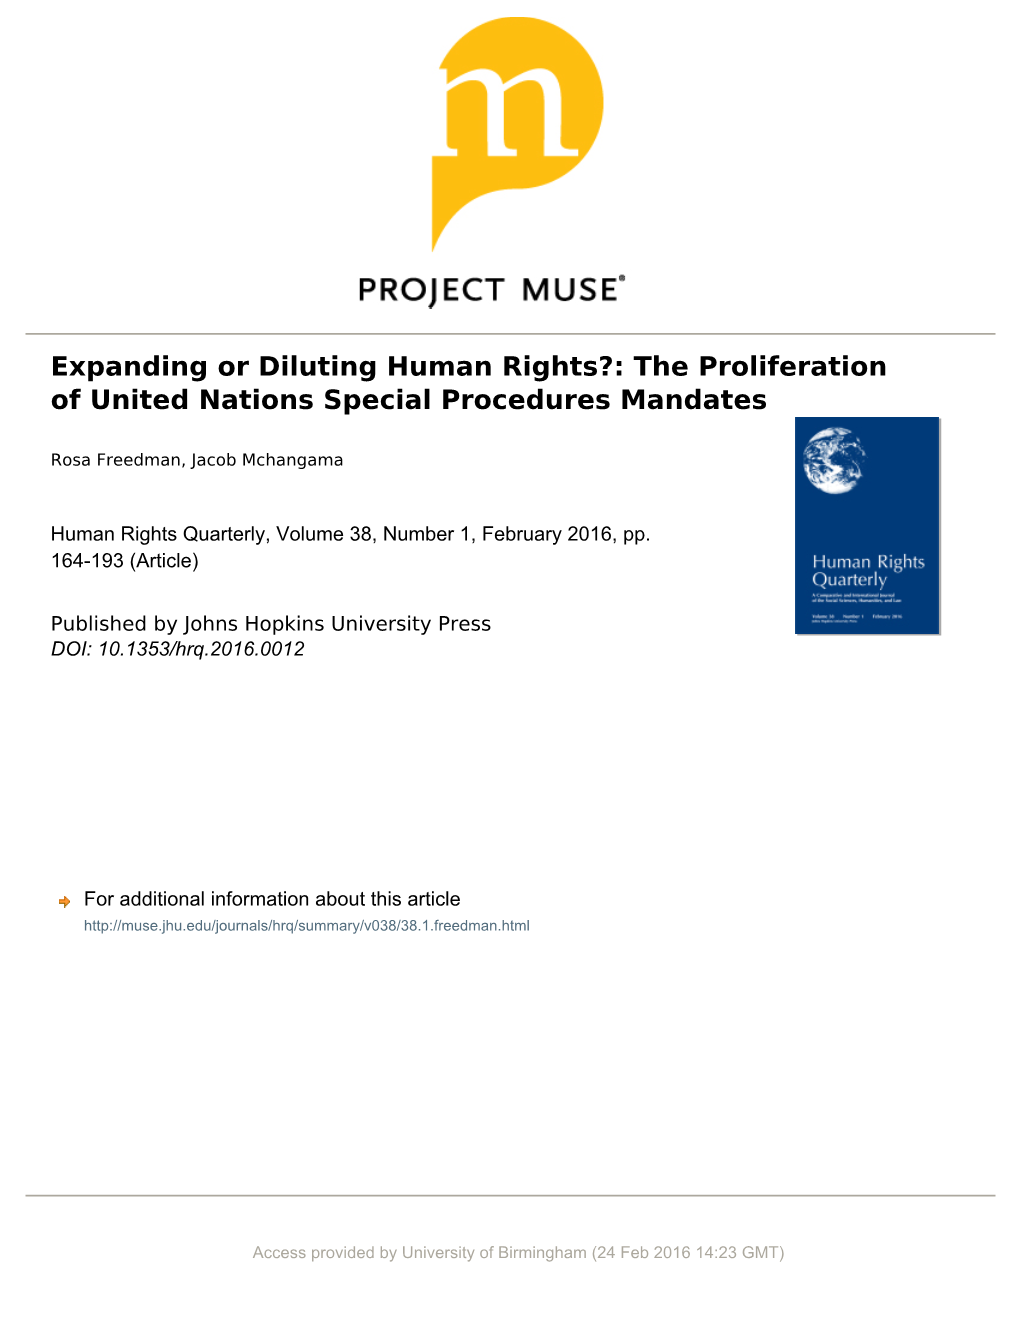 Expanding Or Diluting Human Rights?: the Proliferation of United Nations Special Procedures Mandates